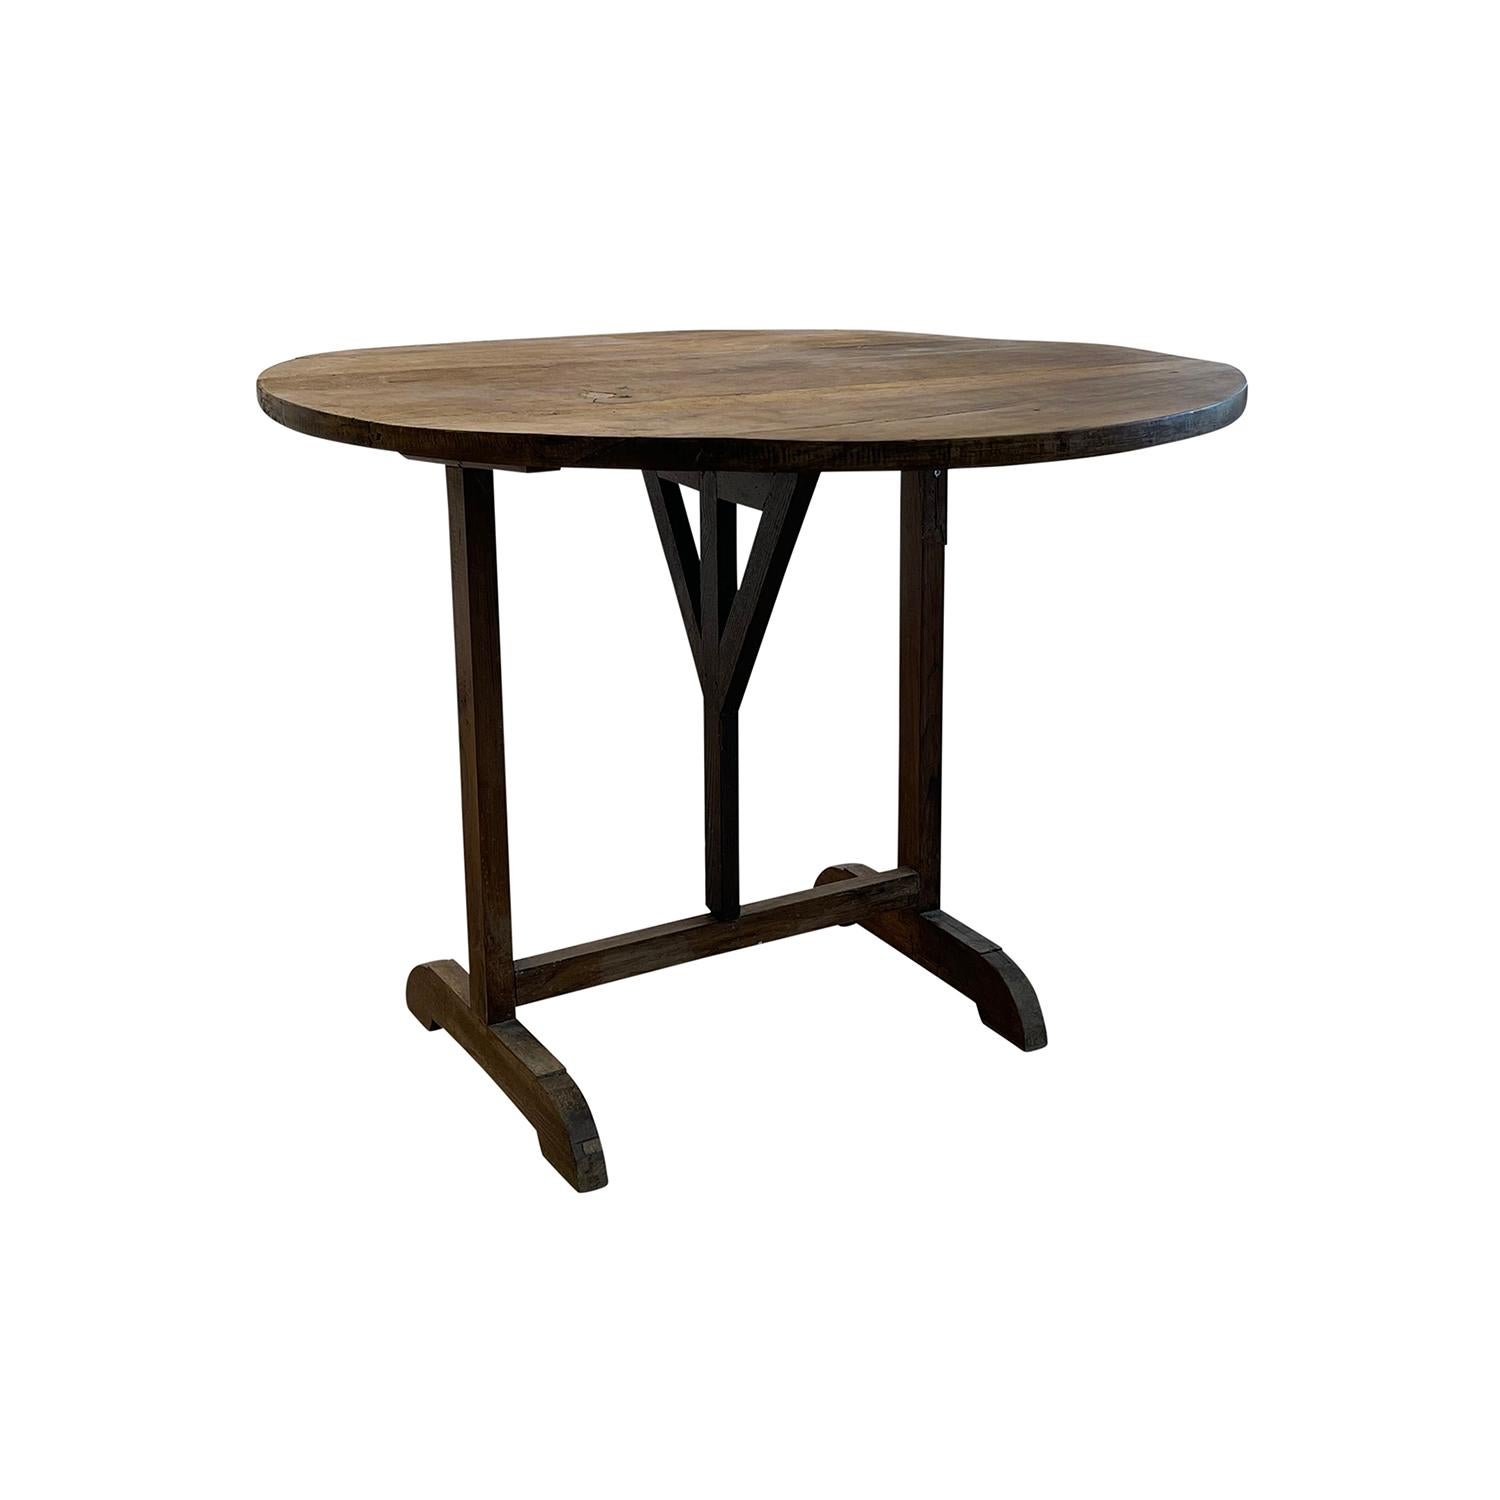 A small, antique French Provencal wine folding table made of hand crafted Walnut wood, in good condition. The Vigneron tables are used in France as occasional tables in wine cellars. Minor fading, scratches due to age. Wear consistent with age and